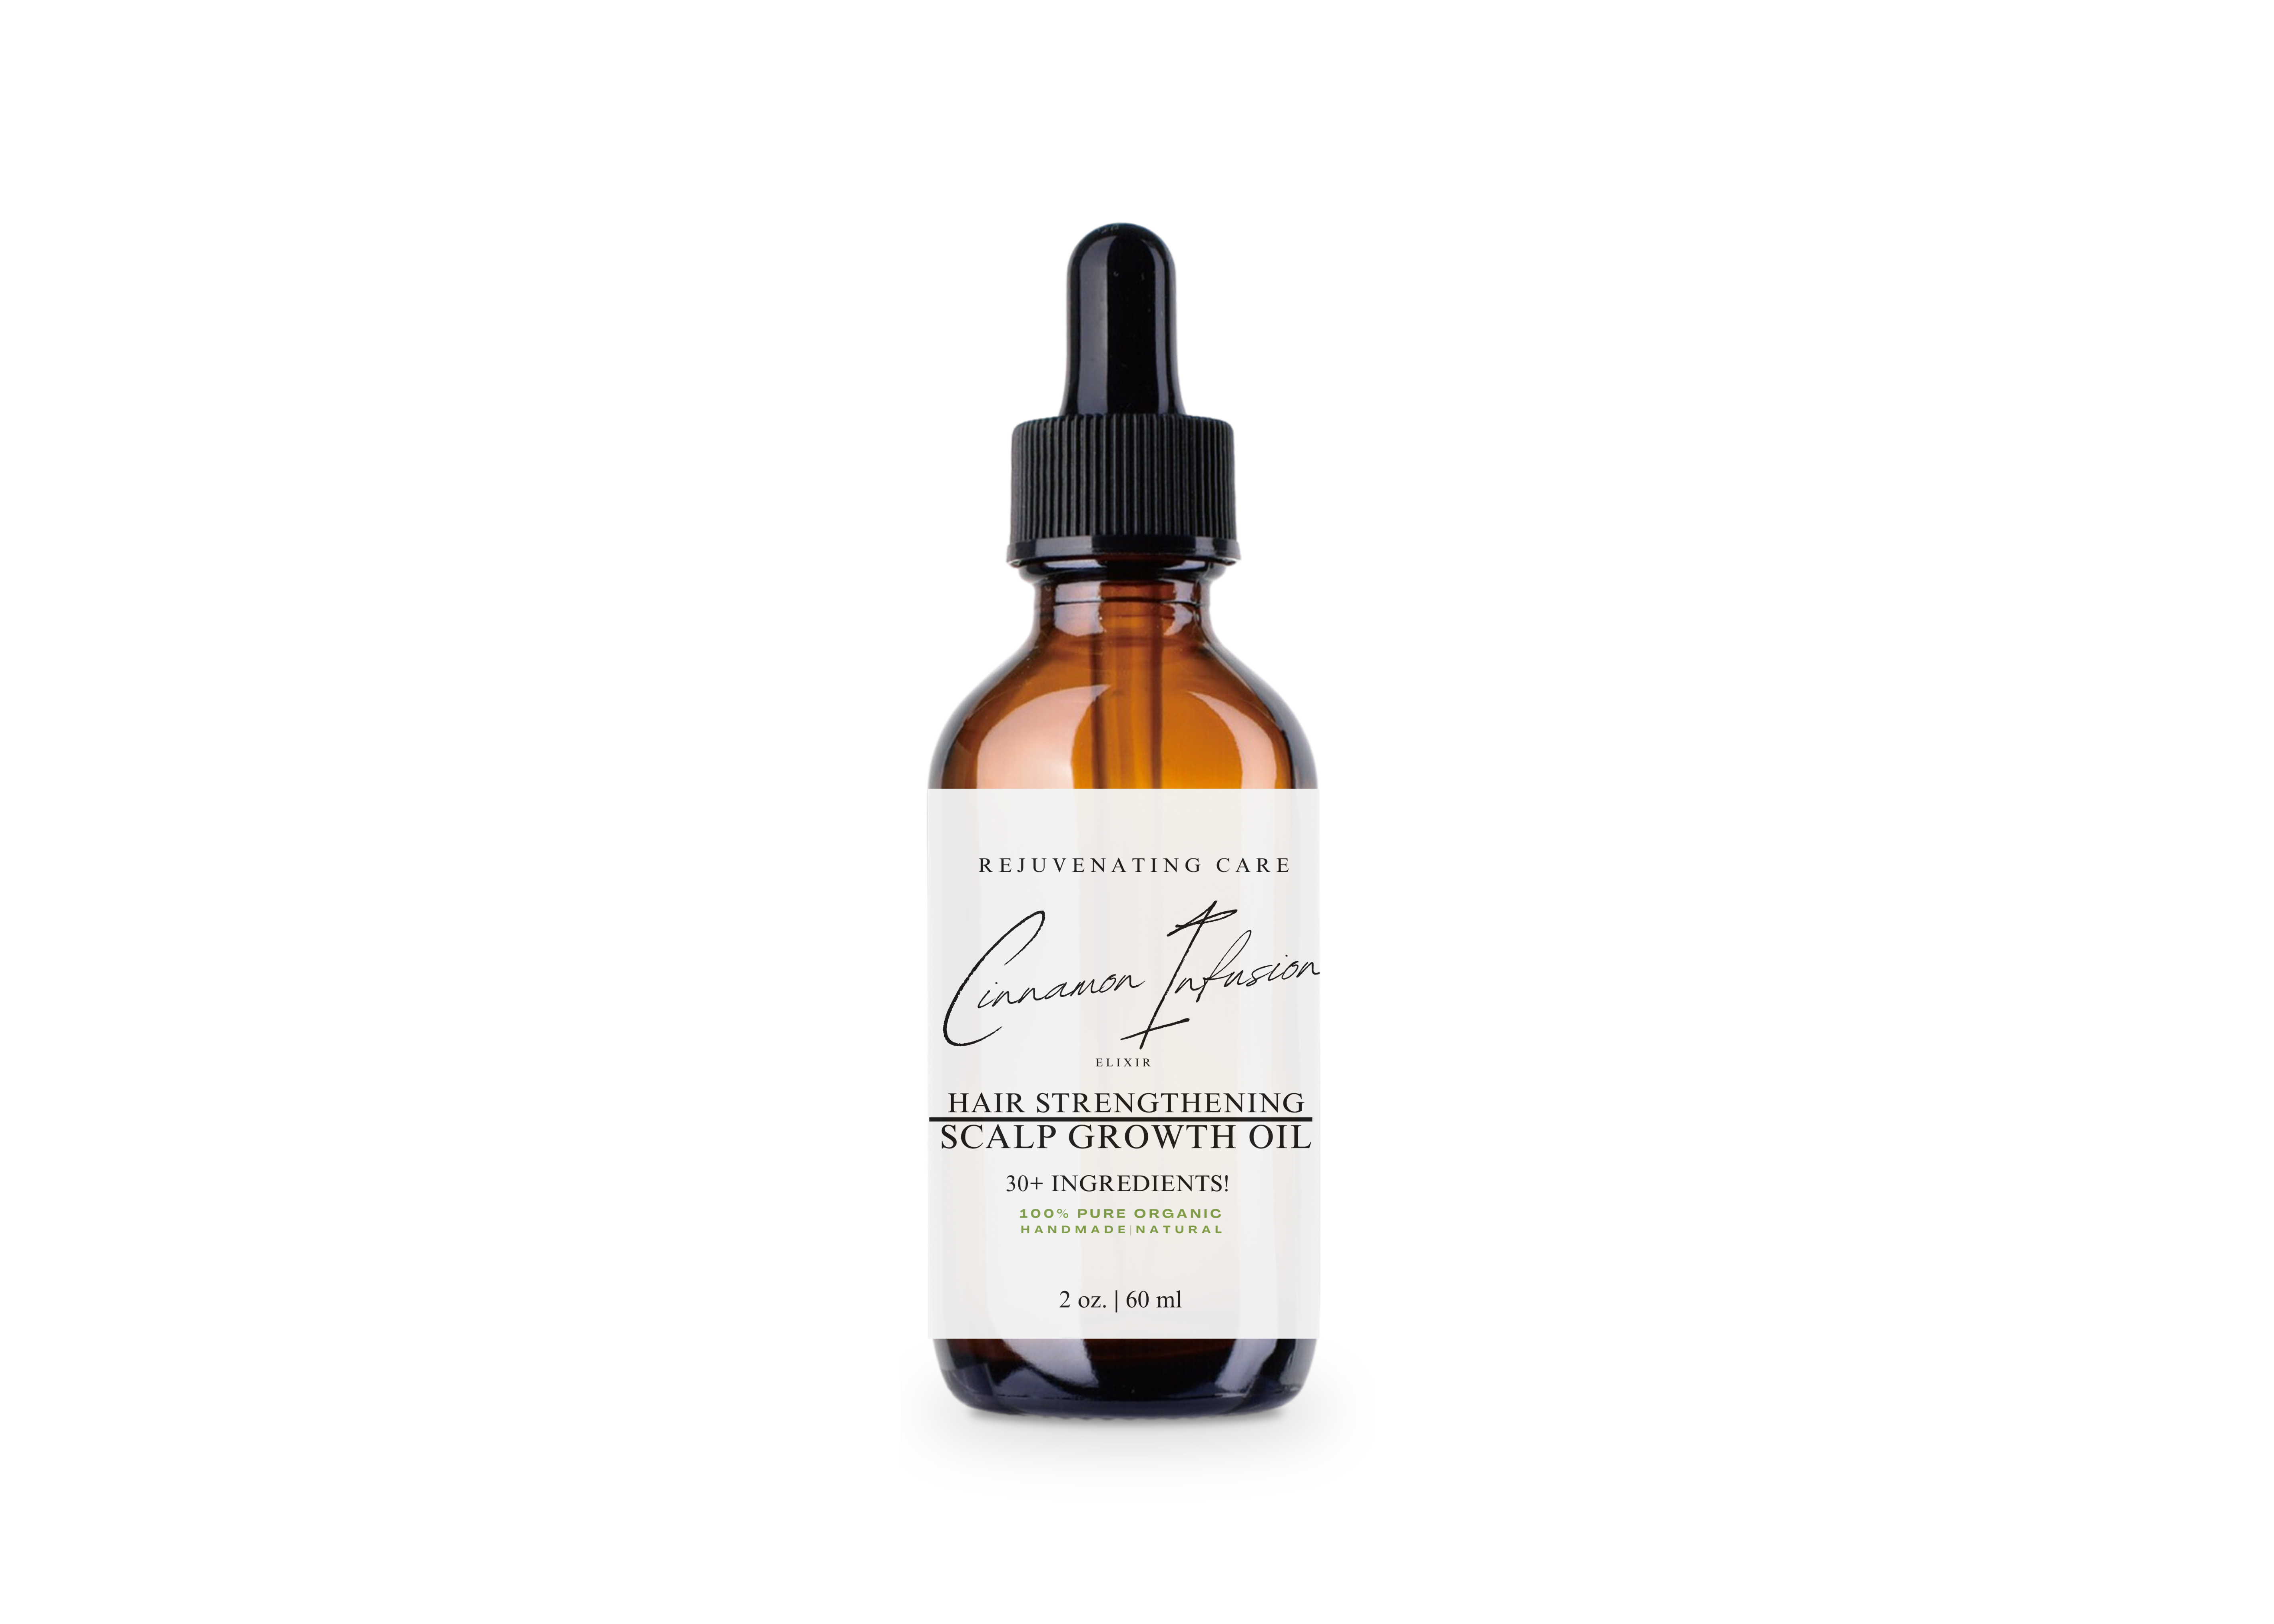 Rejuvenating Care Cinnamon Hair Strengthening and Scalp Growth Oil